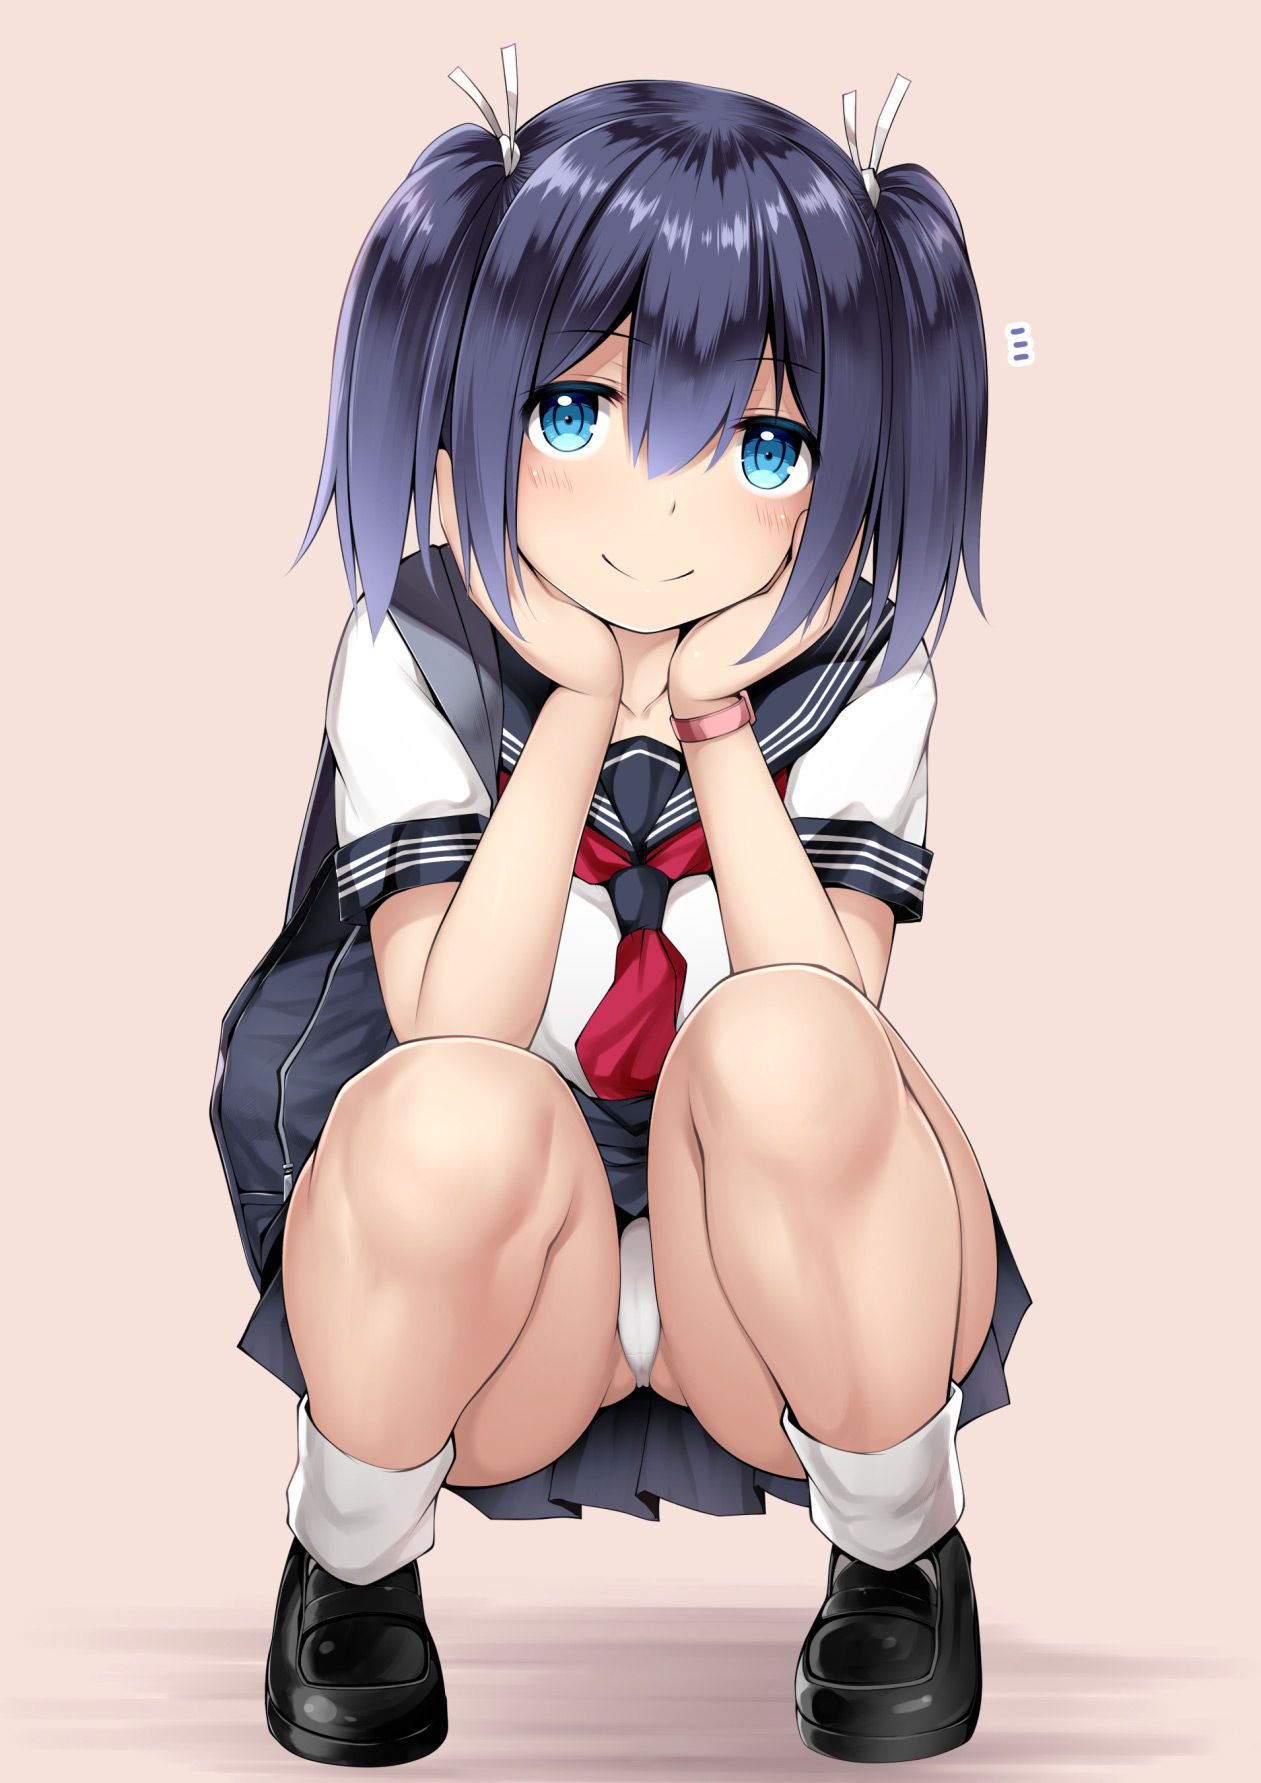 "Where are you looking~?" A soft-looking defenseless crotch image ♪ of a girl squatting with her eyes 3